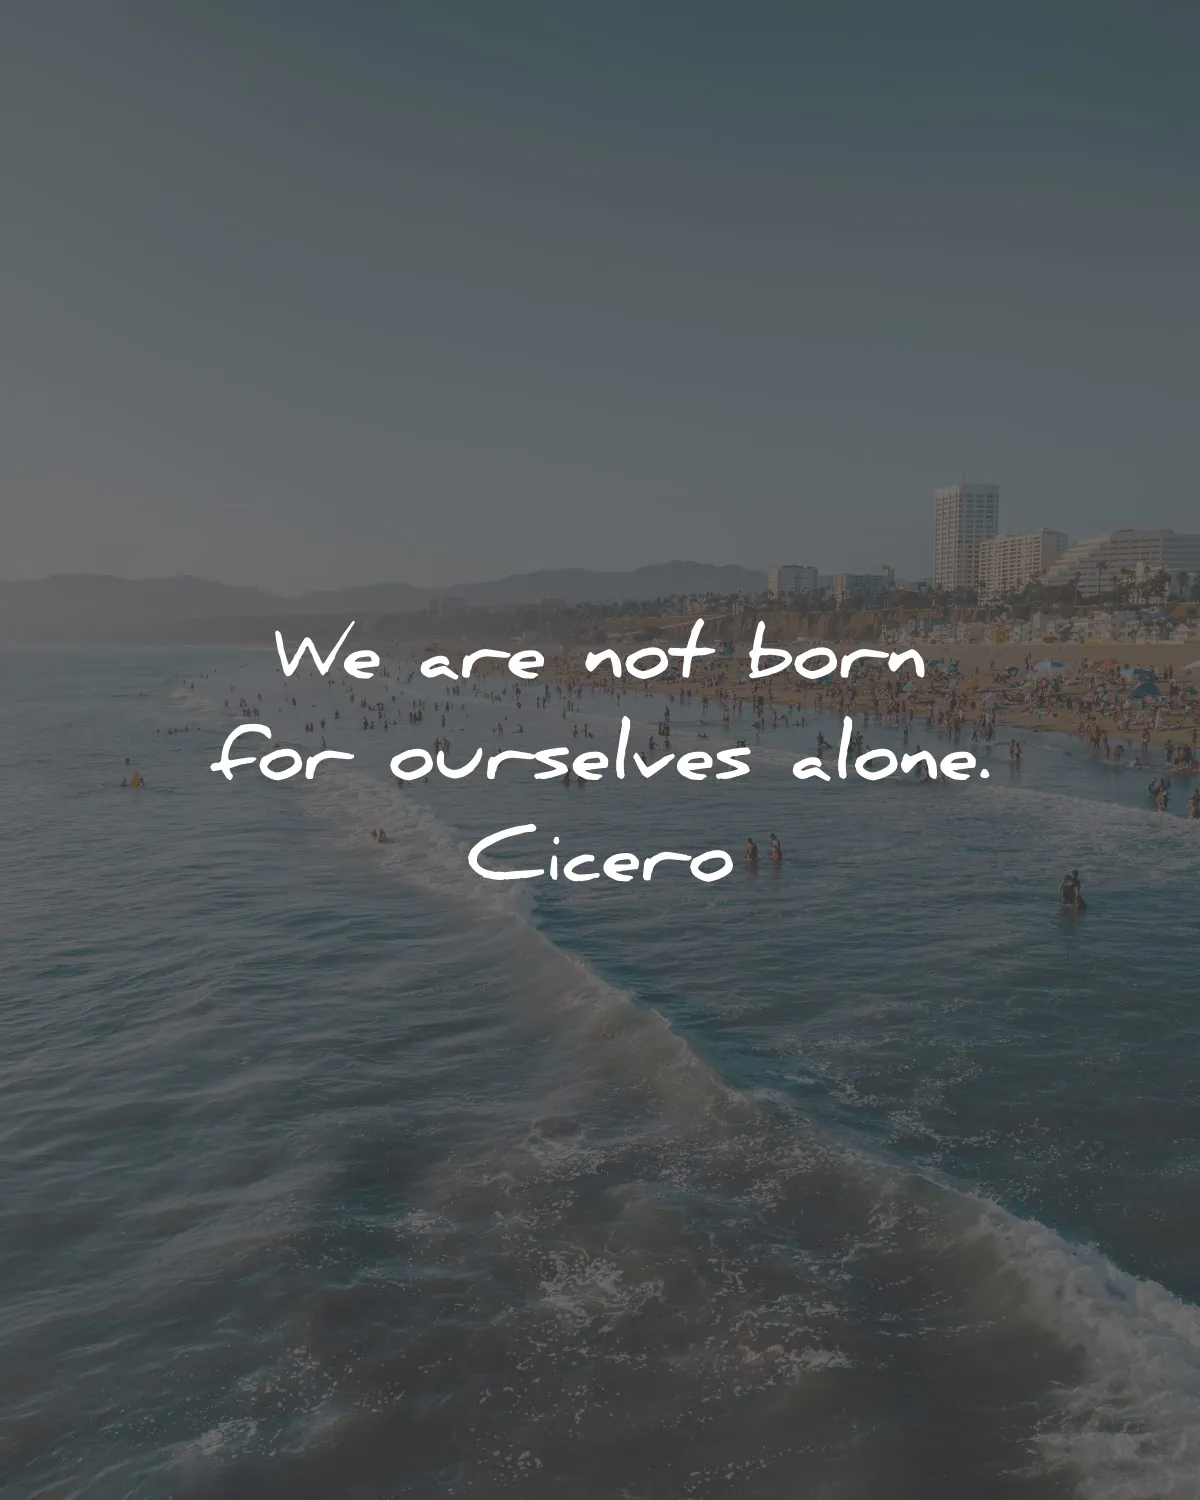 cicero quotes not born ourselves alone wisdom